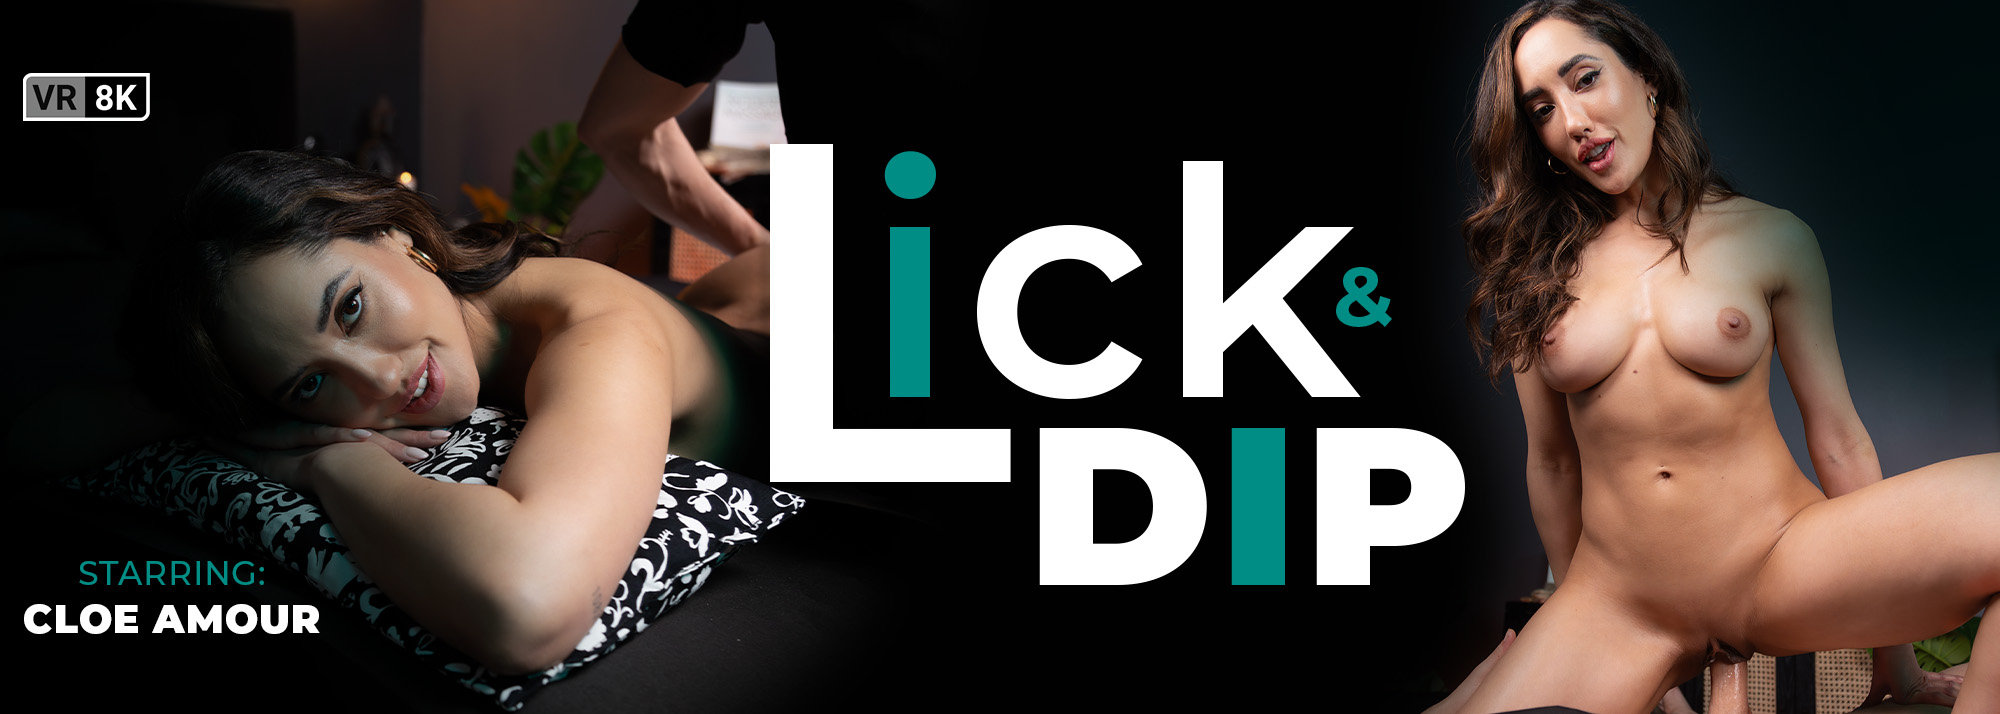 Lick And Dip - VR Porn Video, Starring: Chloe Amour